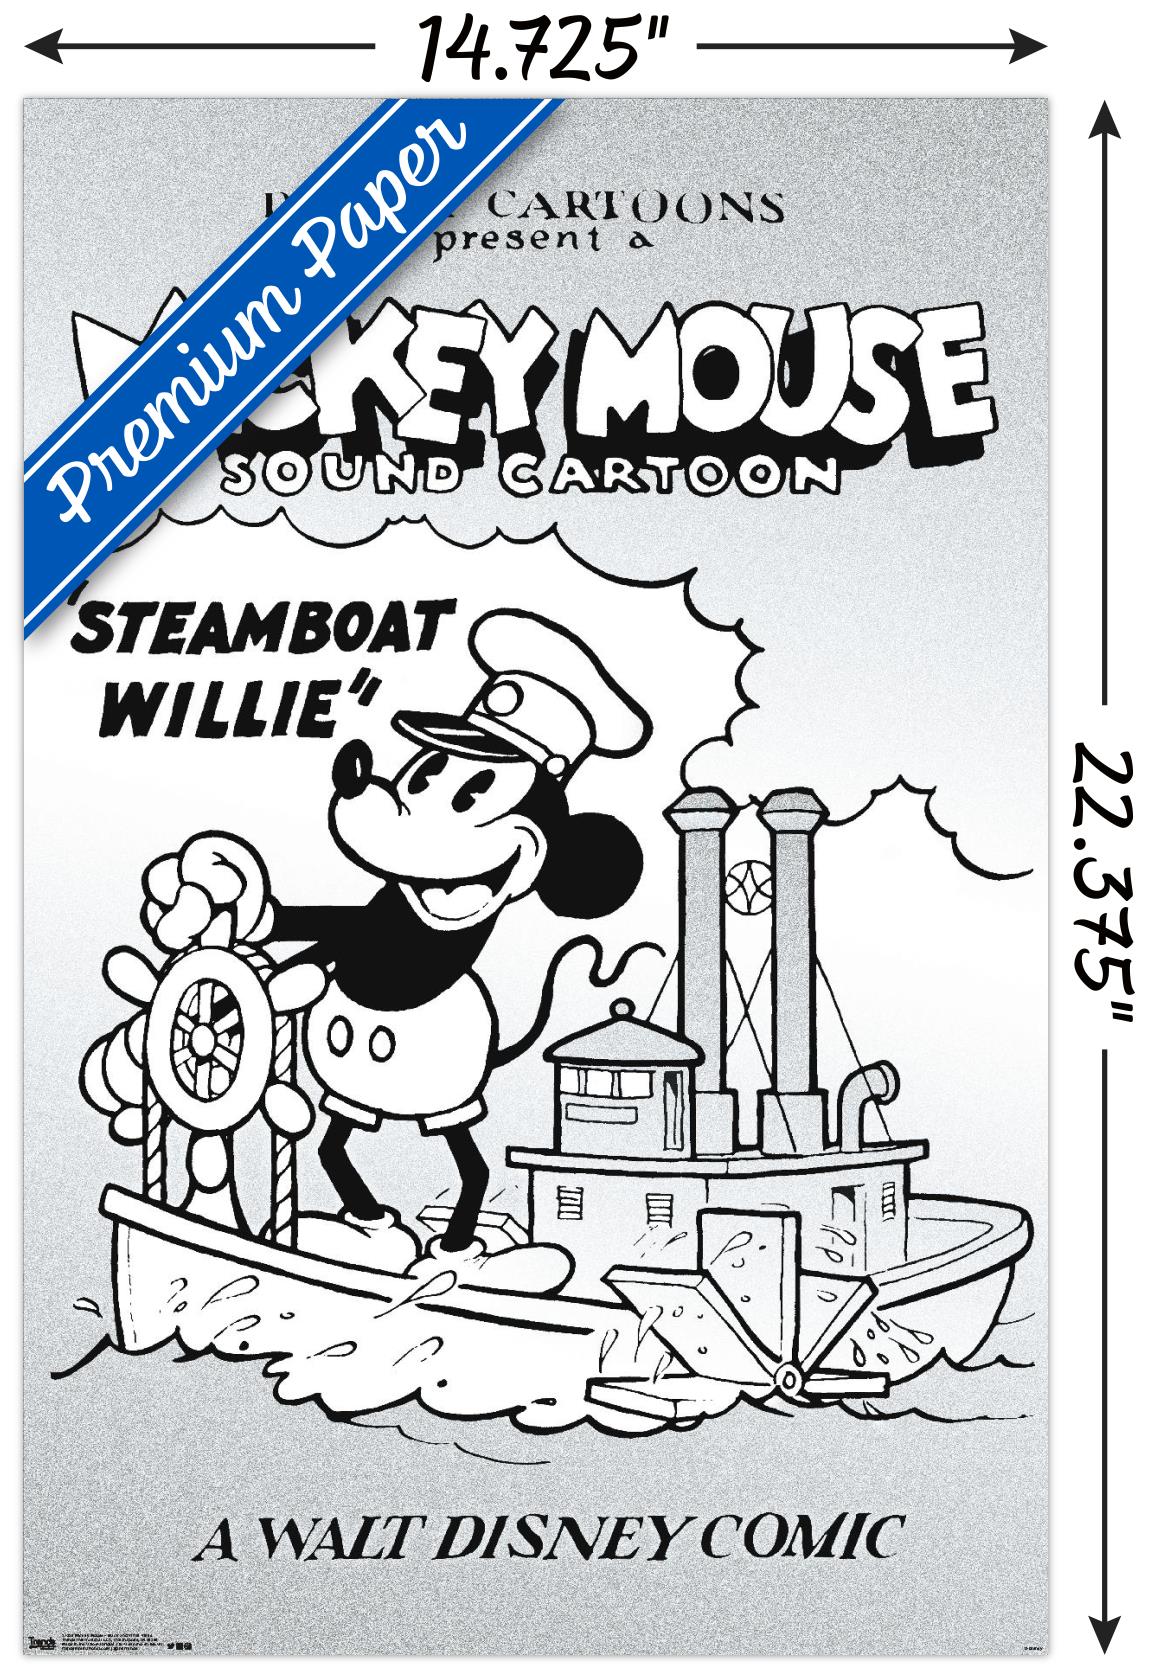 Disney Mickey Mouse - Black and White Steamboat Willie Wall Poster, 14.725" x 22.375" - image 3 of 5